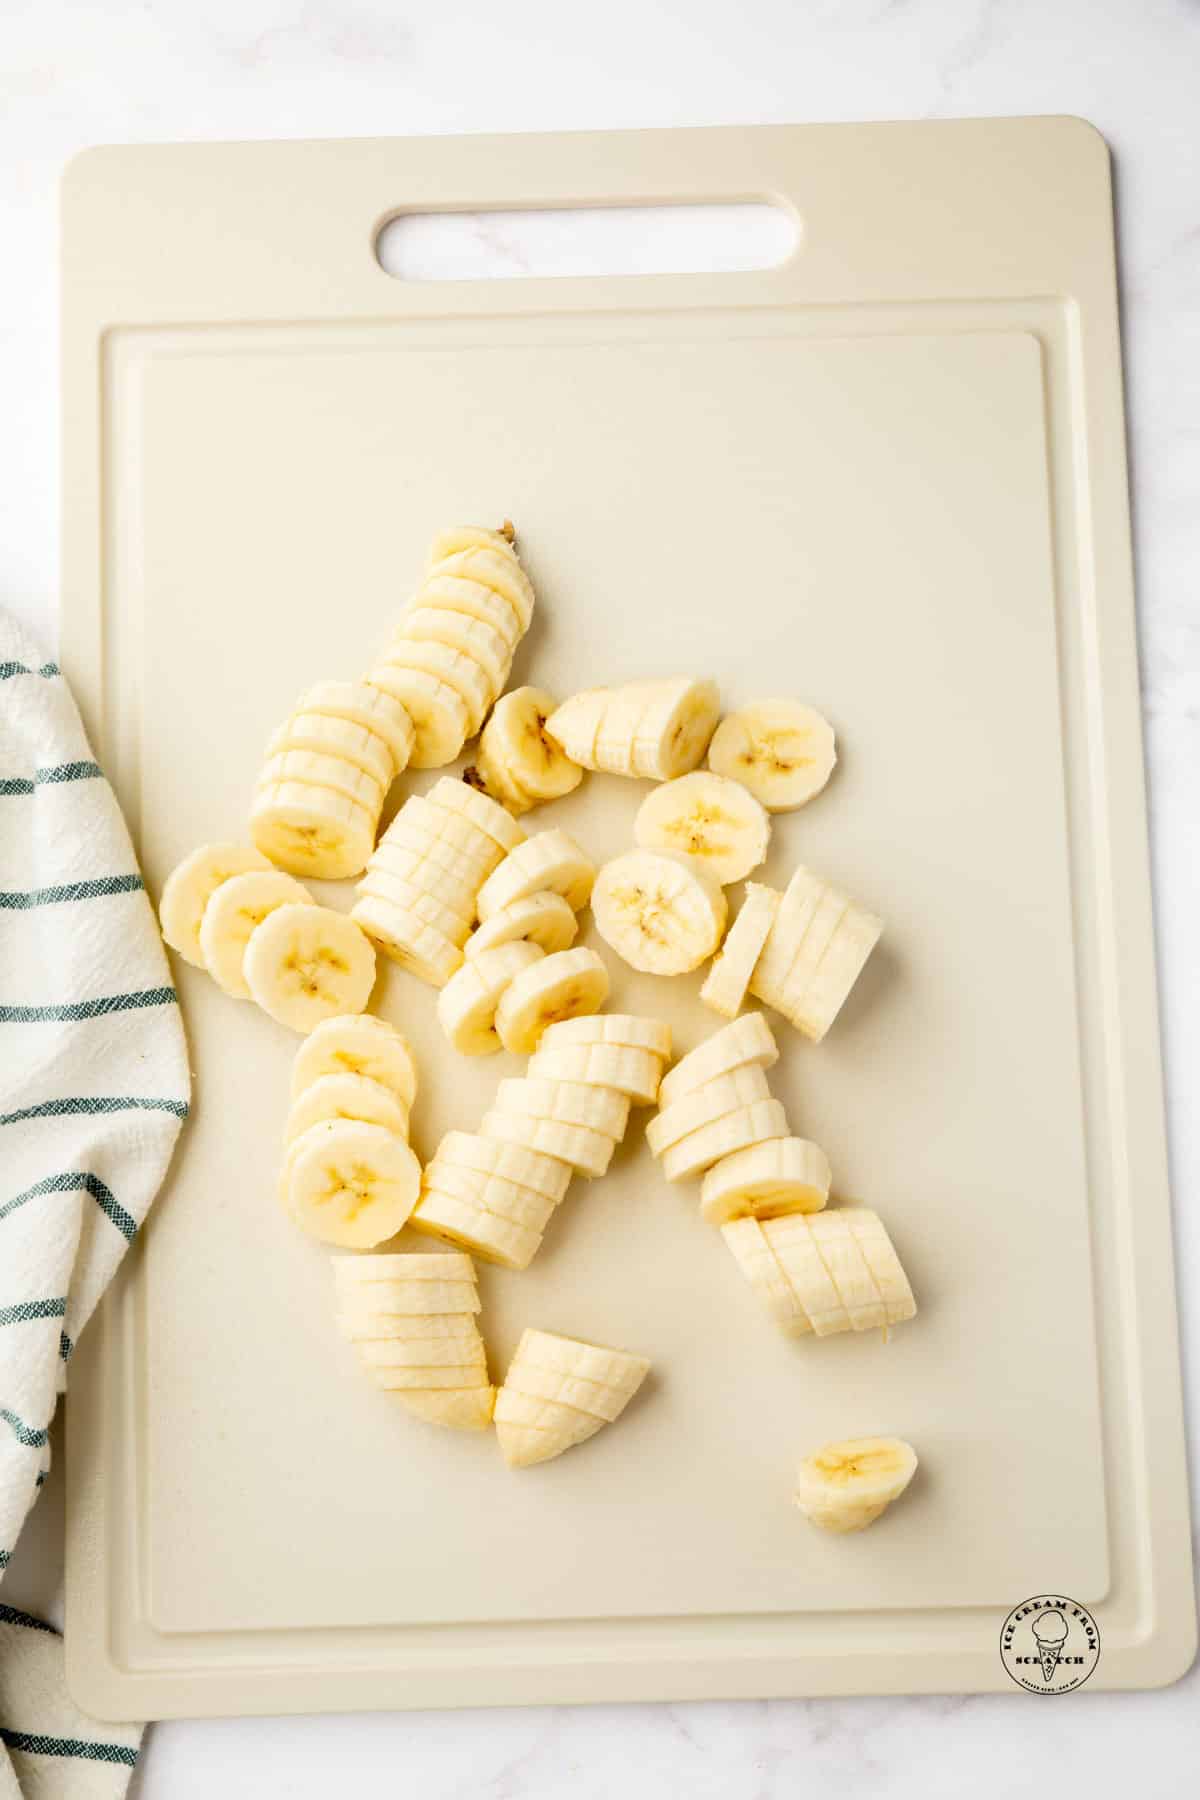 sliced bananas on an off-white cutting board